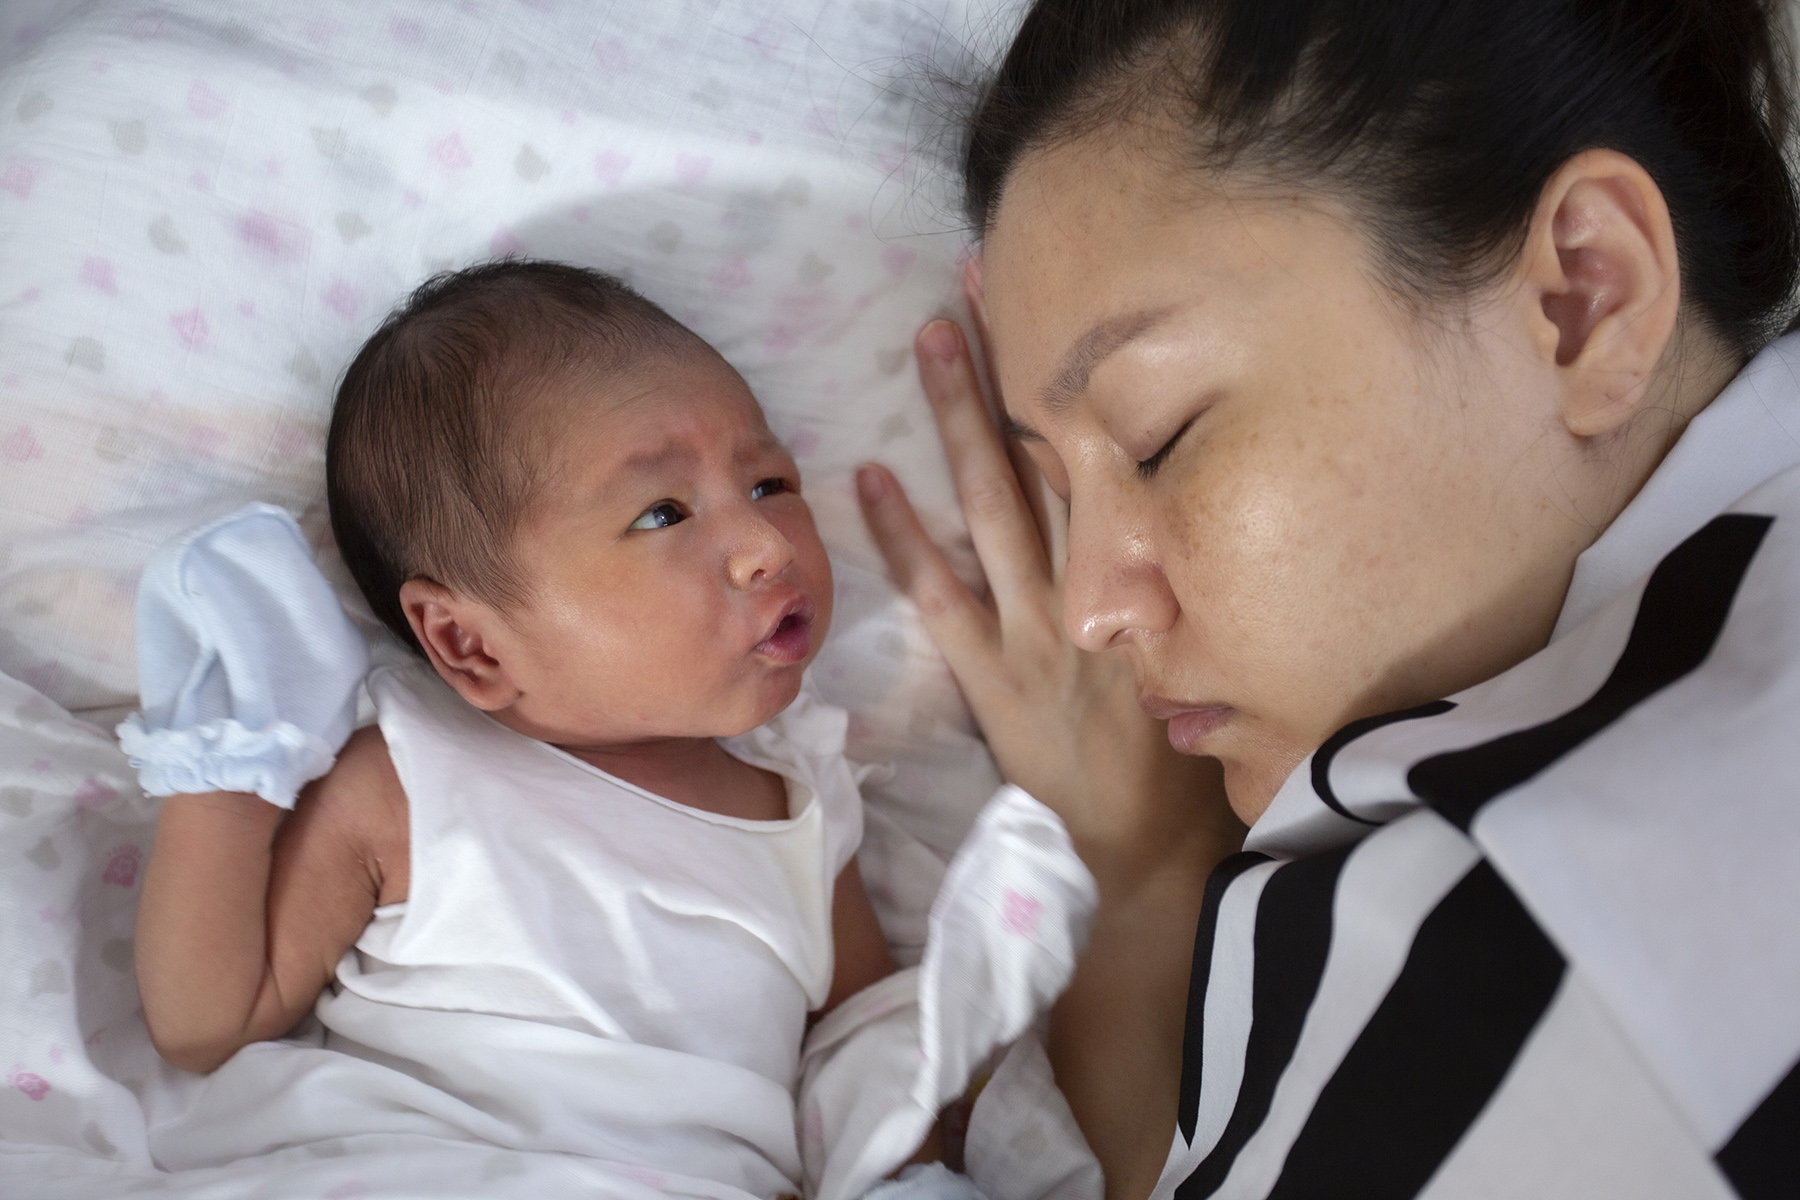 Tired mother sleeps next to awake newborn, she could hire a nanny but would need a work visa for Singapore